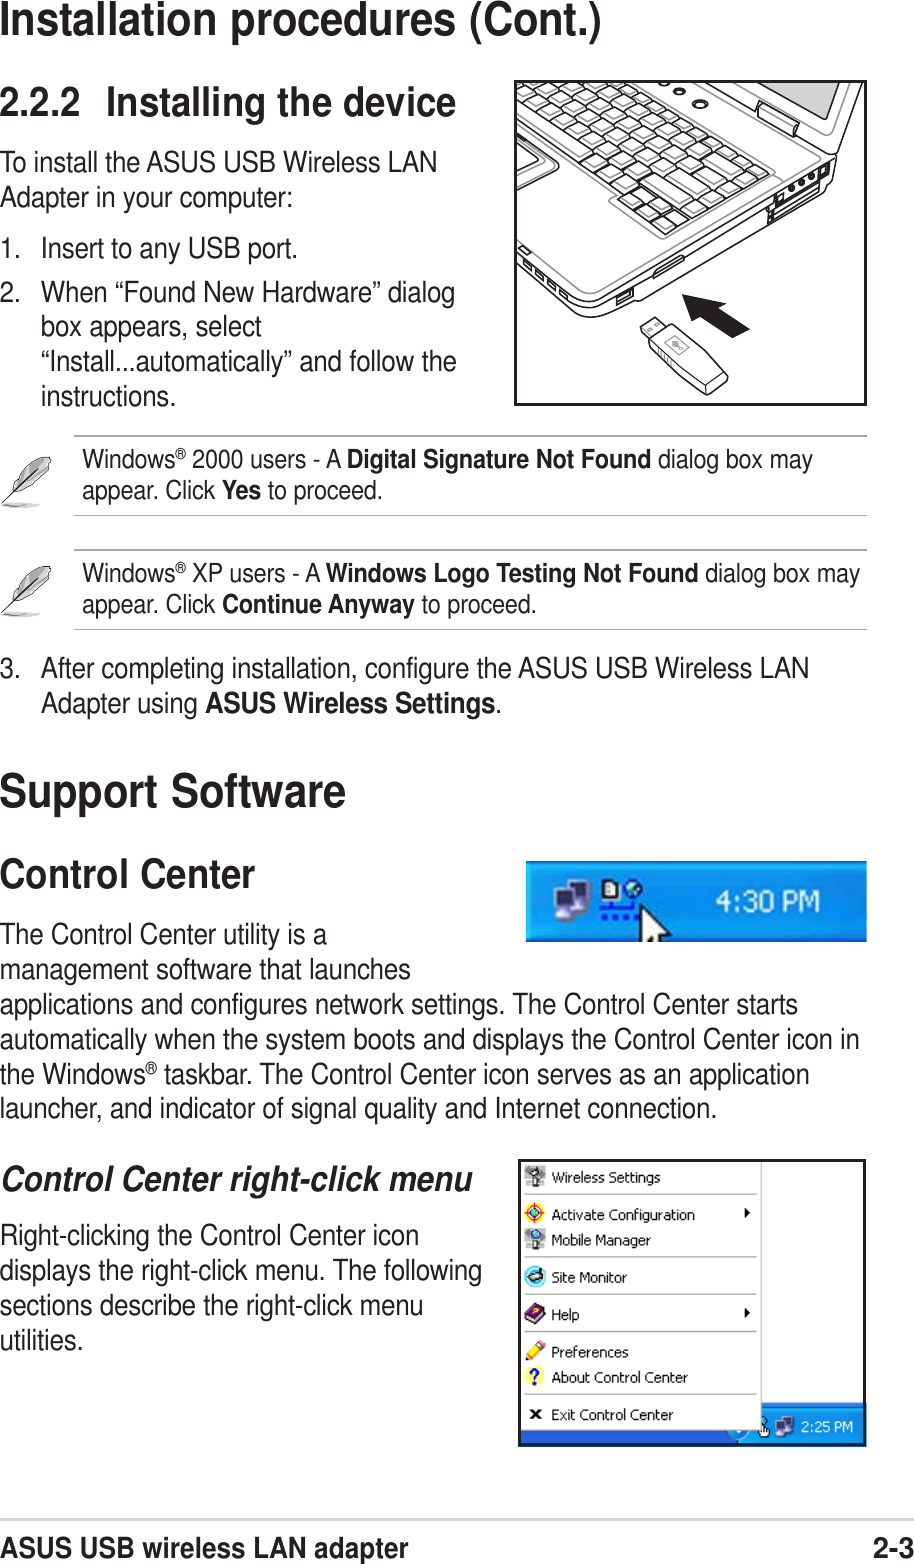 ASUS USB wireless LAN adapter2-3Installation procedures (Cont.)2.2.2 Installing the deviceTo install the ASUS USB Wireless LANAdapter in your computer:1. Insert to any USB port.2. When “Found New Hardware” dialogbox appears, select“Install...automatically” and follow theinstructions.Windows® 2000 users - A Digital Signature Not Found dialog box mayappear. Click Yes to proceed.Windows® XP users - A Windows Logo Testing Not Found dialog box mayappear. Click Continue Anyway to proceed.3. After completing installation, configure the ASUS USB Wireless LANAdapter using ASUS Wireless Settings.Support SoftwareControl CenterThe Control Center utility is amanagement software that launchesapplications and configures network settings. The Control Center startsautomatically when the system boots and displays the Control Center icon inthe Windows® taskbar. The Control Center icon serves as an applicationlauncher, and indicator of signal quality and Internet connection.Control Center right-click menuRight-clicking the Control Center icondisplays the right-click menu. The followingsections describe the right-click menuutilities.